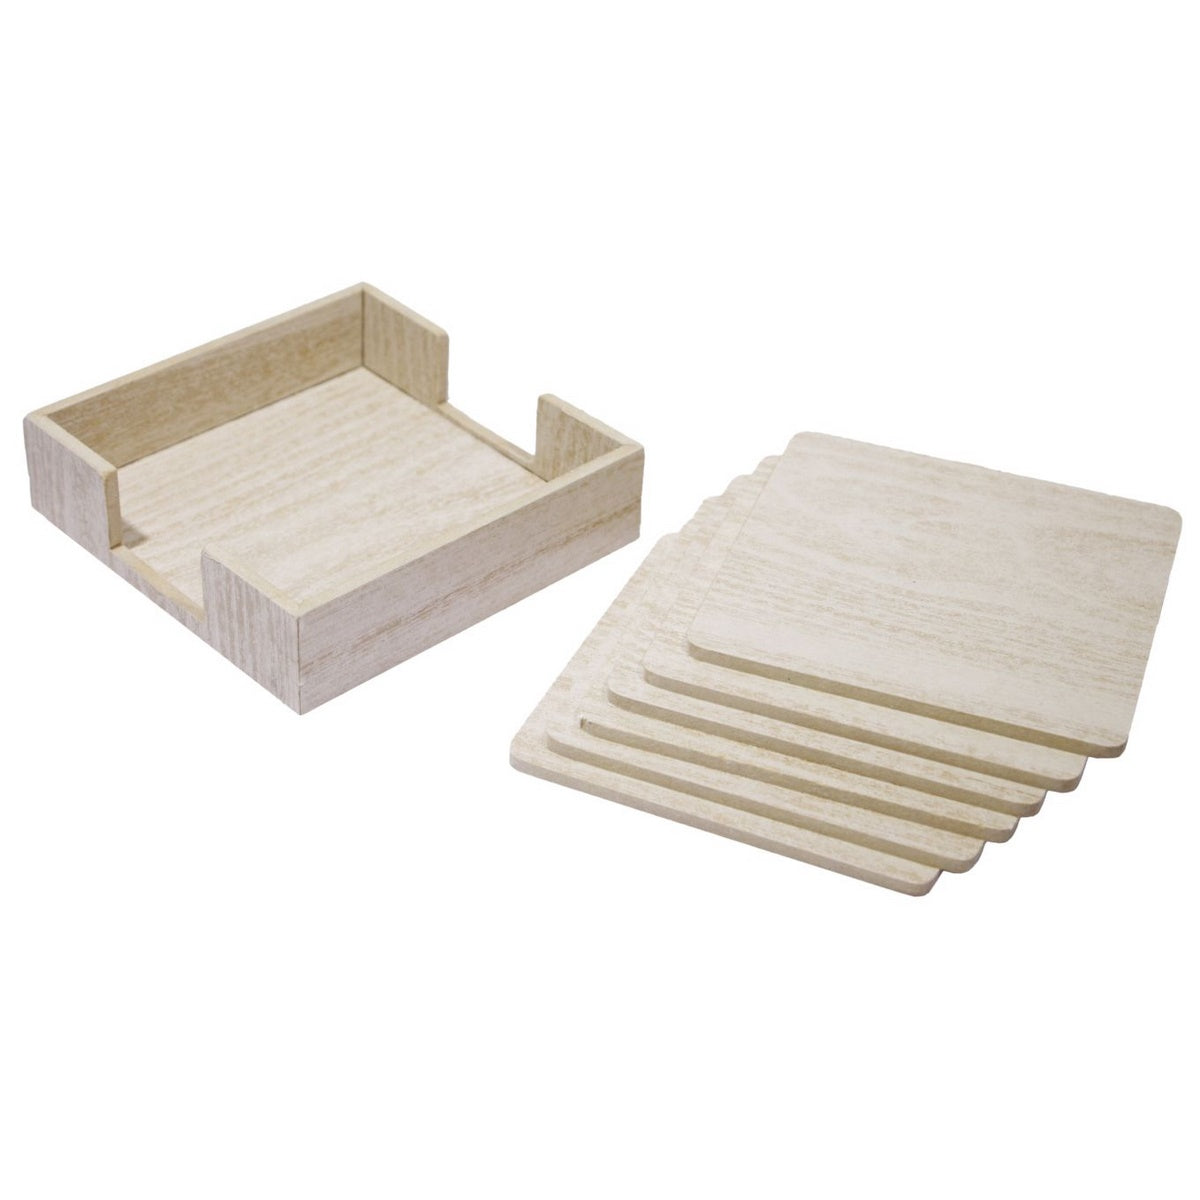 Set of 6 Light Brown Square Wooden Tea Coaster - For Corporate Gifting, Office Use, Personal Use, Return Gift  JAK25TCW